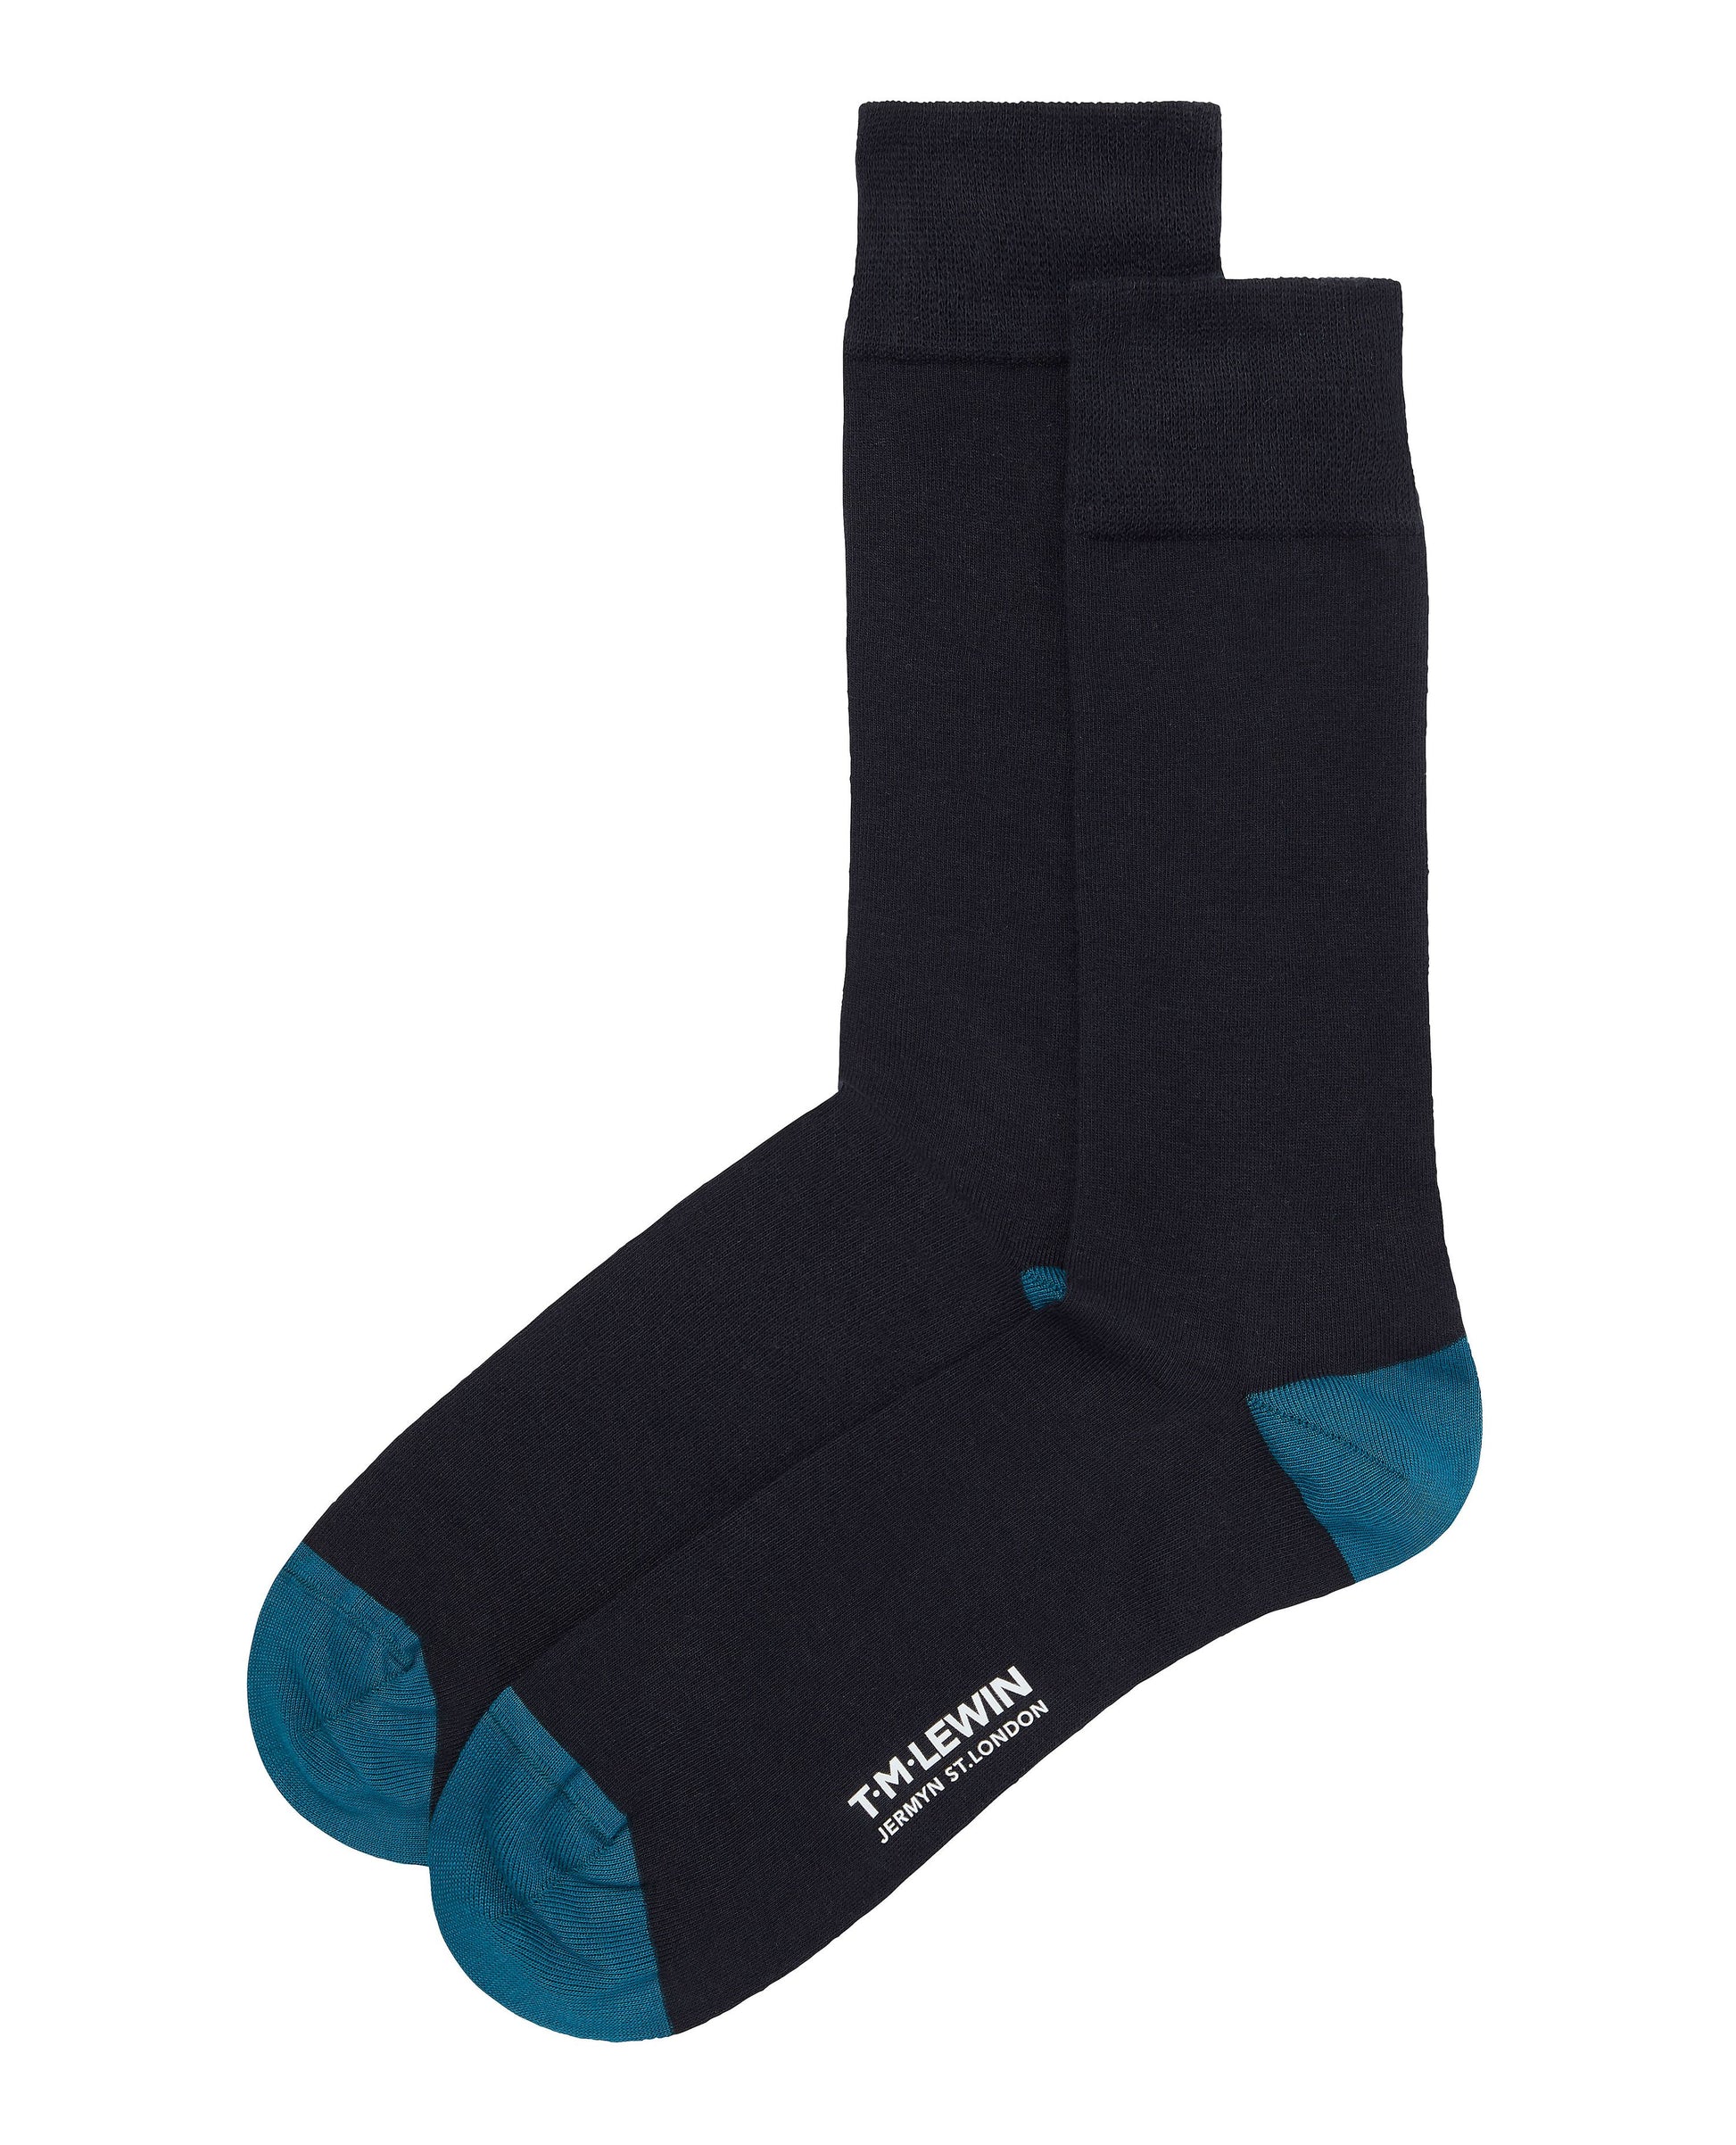 Image 7 of Navy Contrast Heel and Toe 5 Pack Sock Set